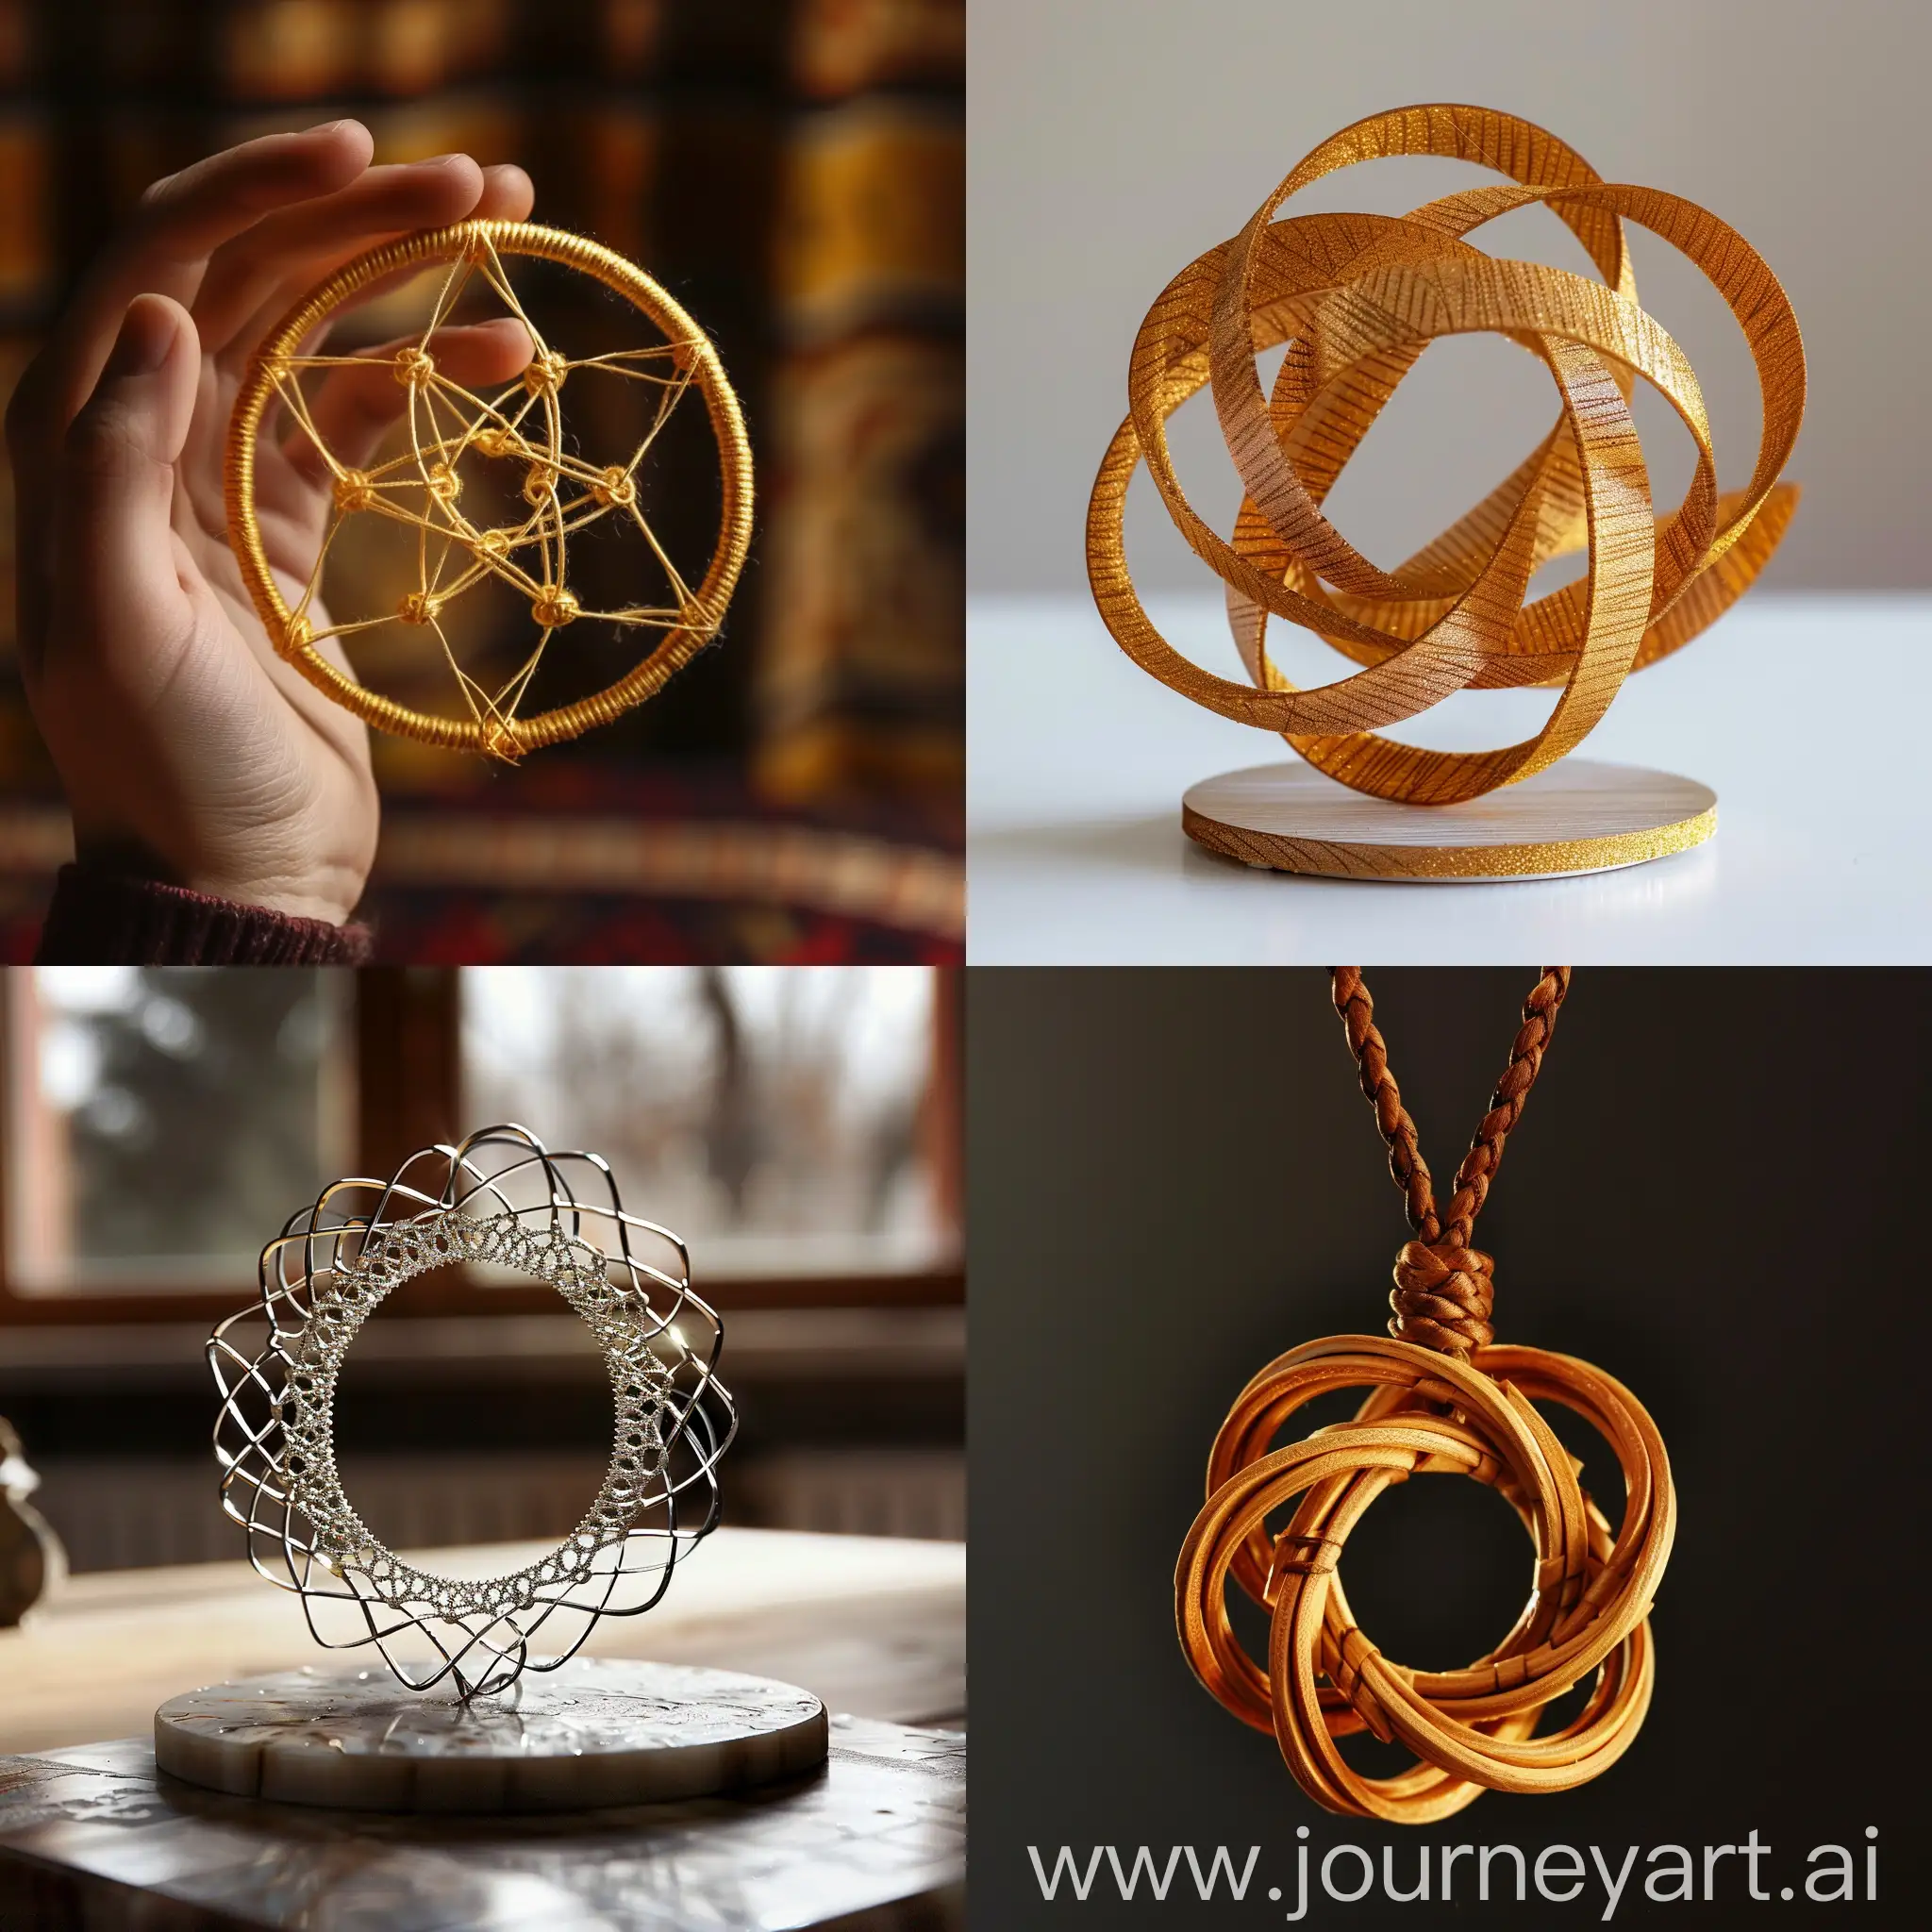 generate a romanian martisor in the shape of lorrenz attractor